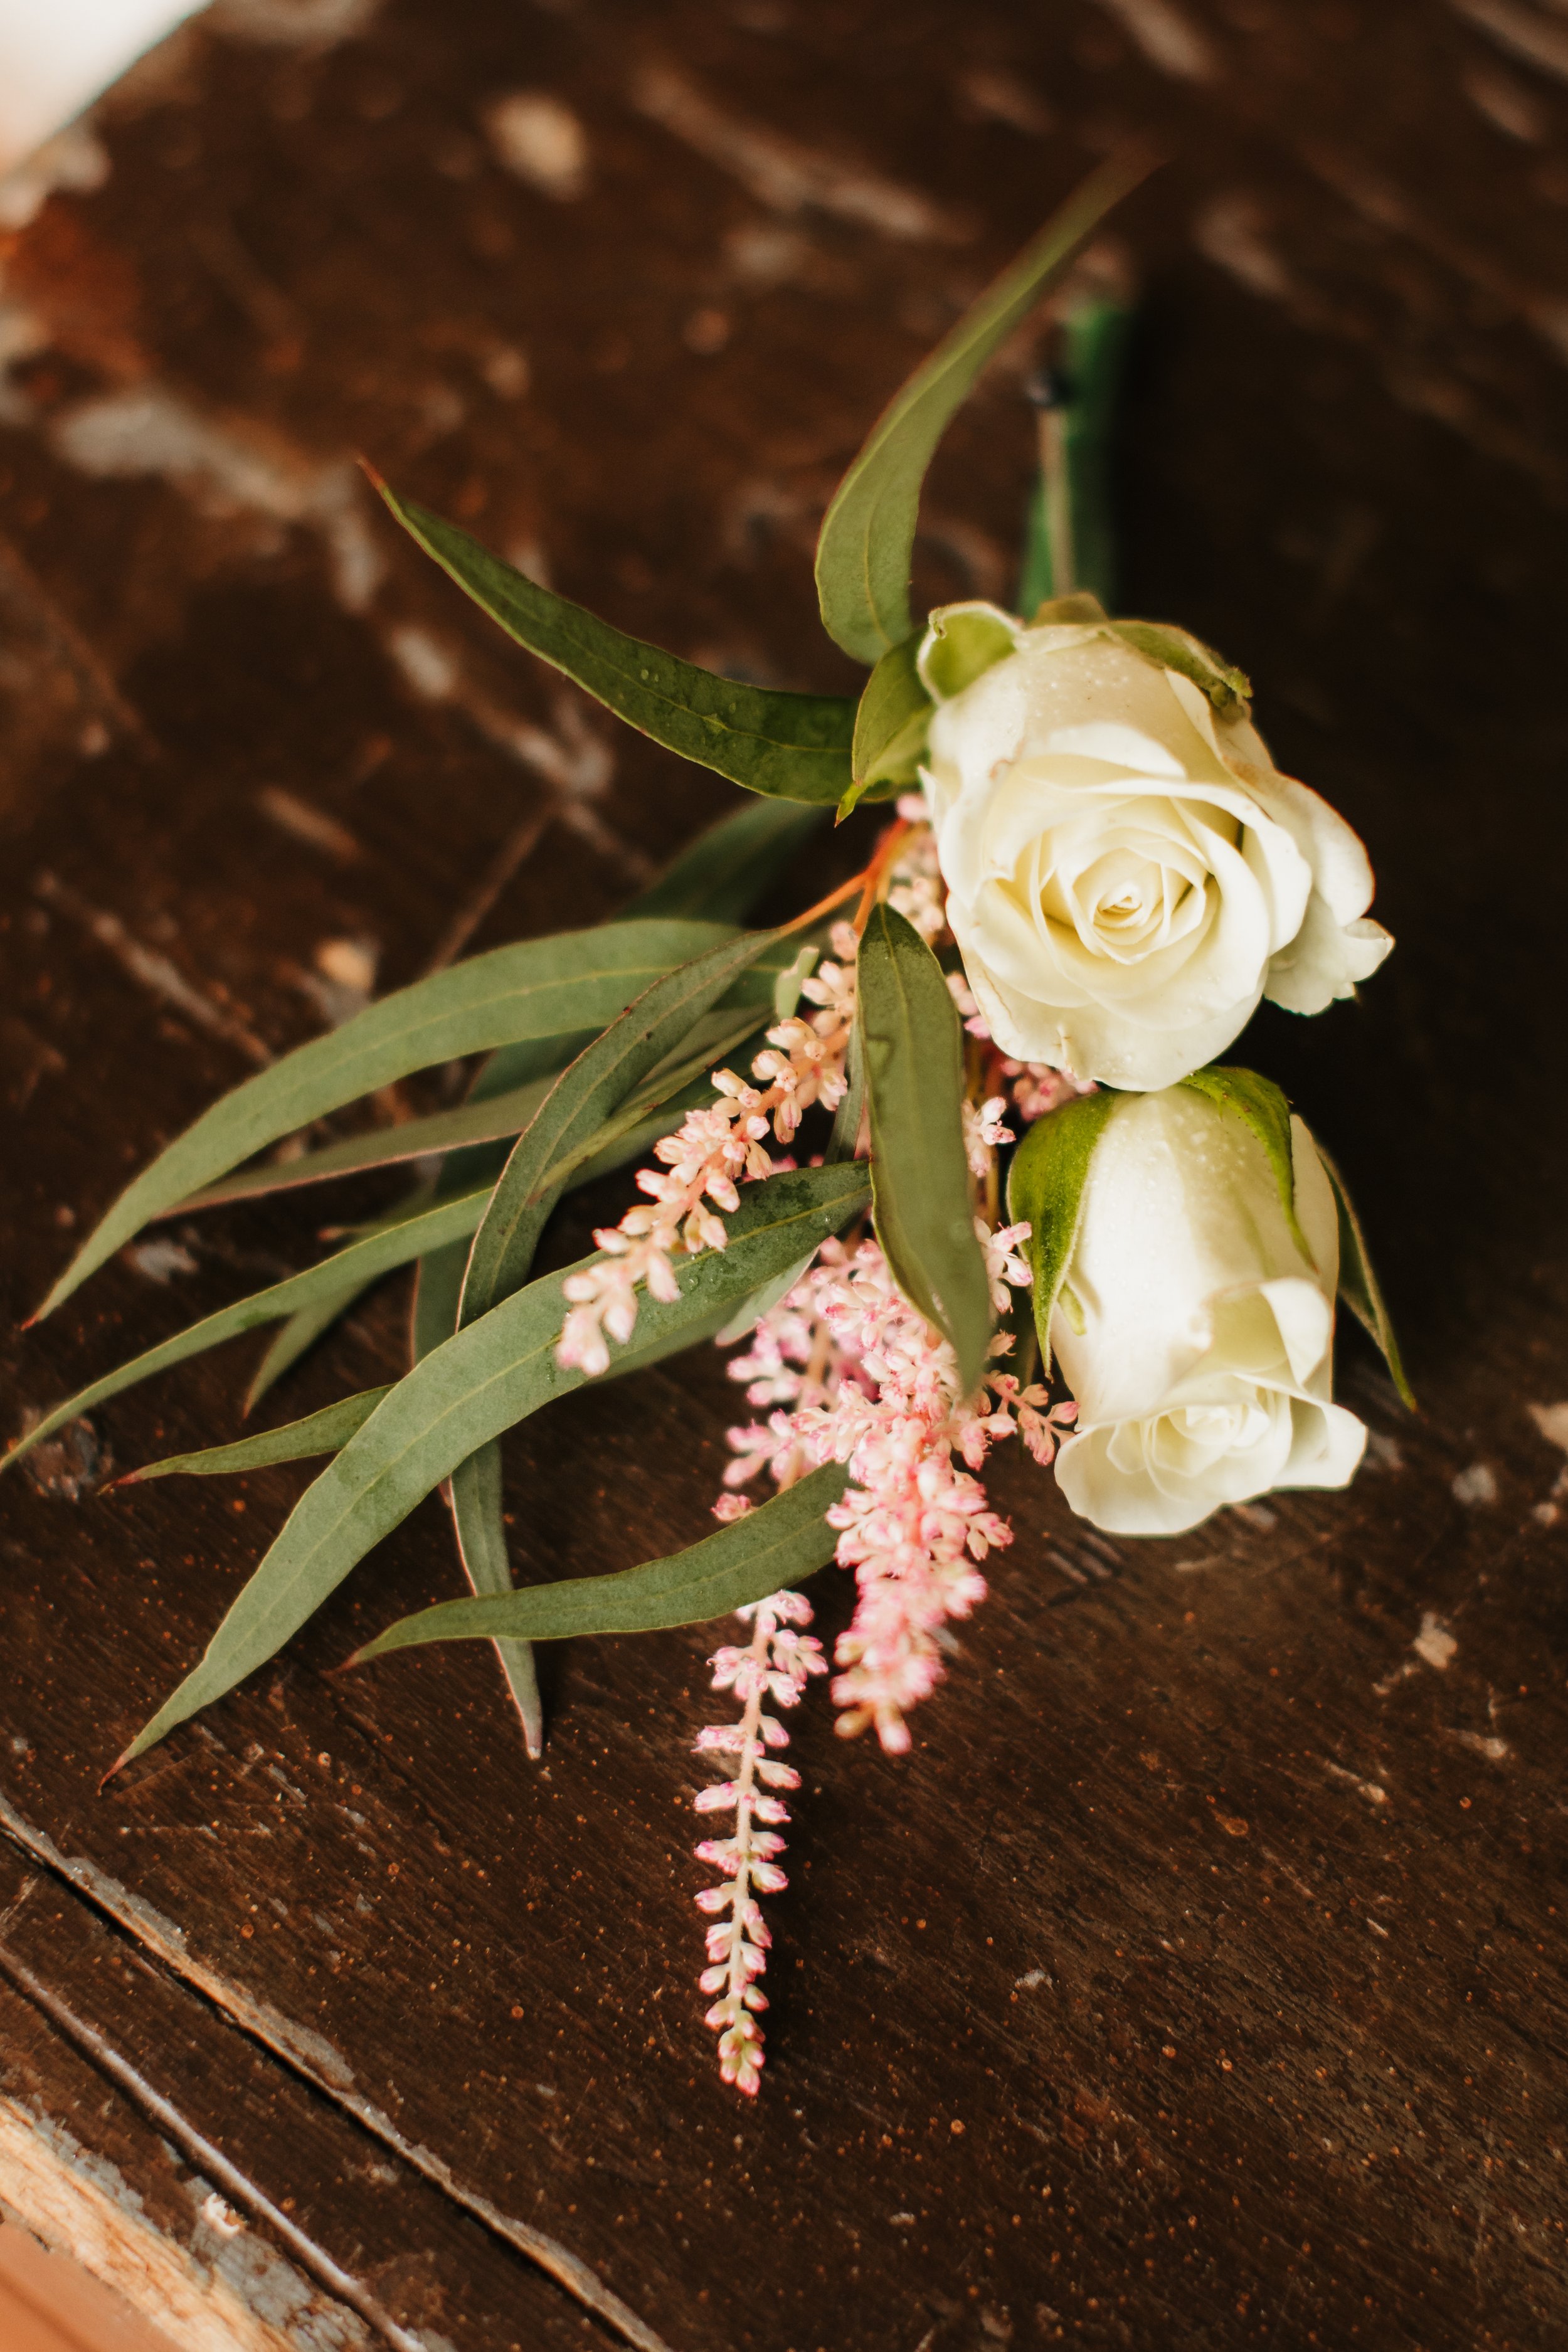  Small white spray roses and delicate pink flowers for a boutonniere for an intimate wedding in Illinois #TealaWardPhotography #illinoisphotographer #princetonillinois #weddingphotographer #intimatewedding 